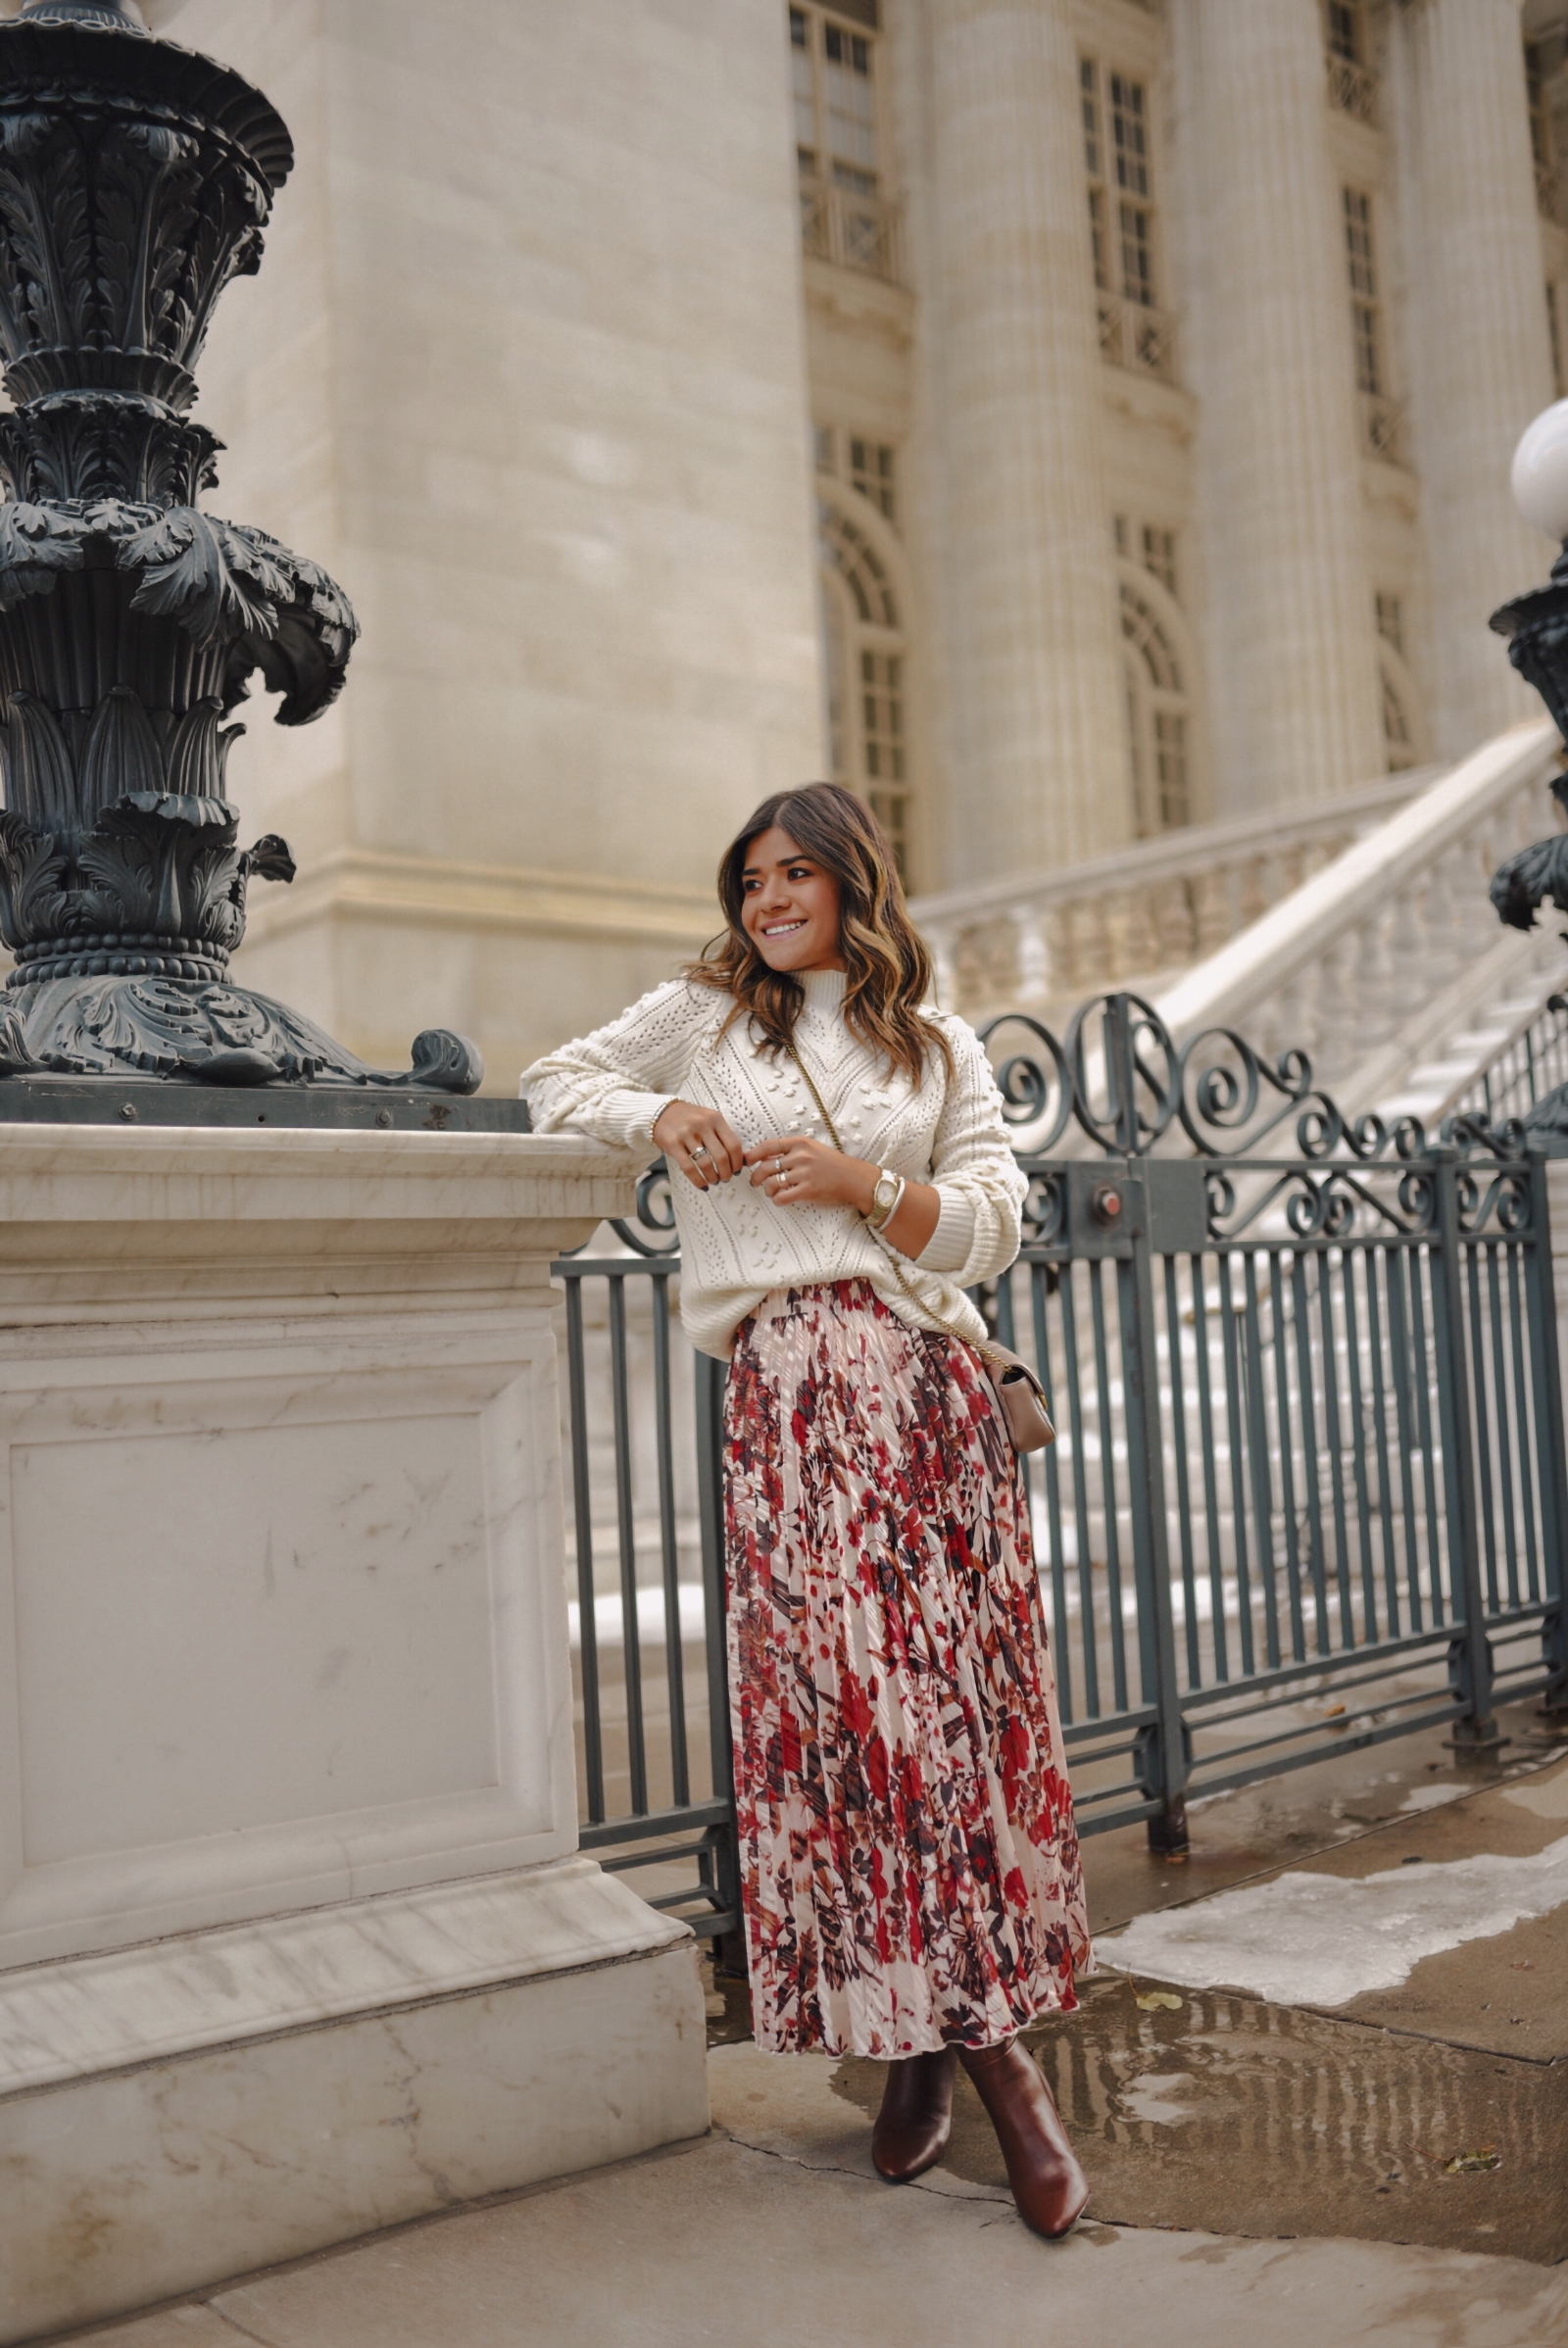 Carolina Hellal of Chic Talk wearing a Sezane knit sweater, h&m floral maxi skirt, Aersoles tall botos and Gucci Marmont crossbody bag